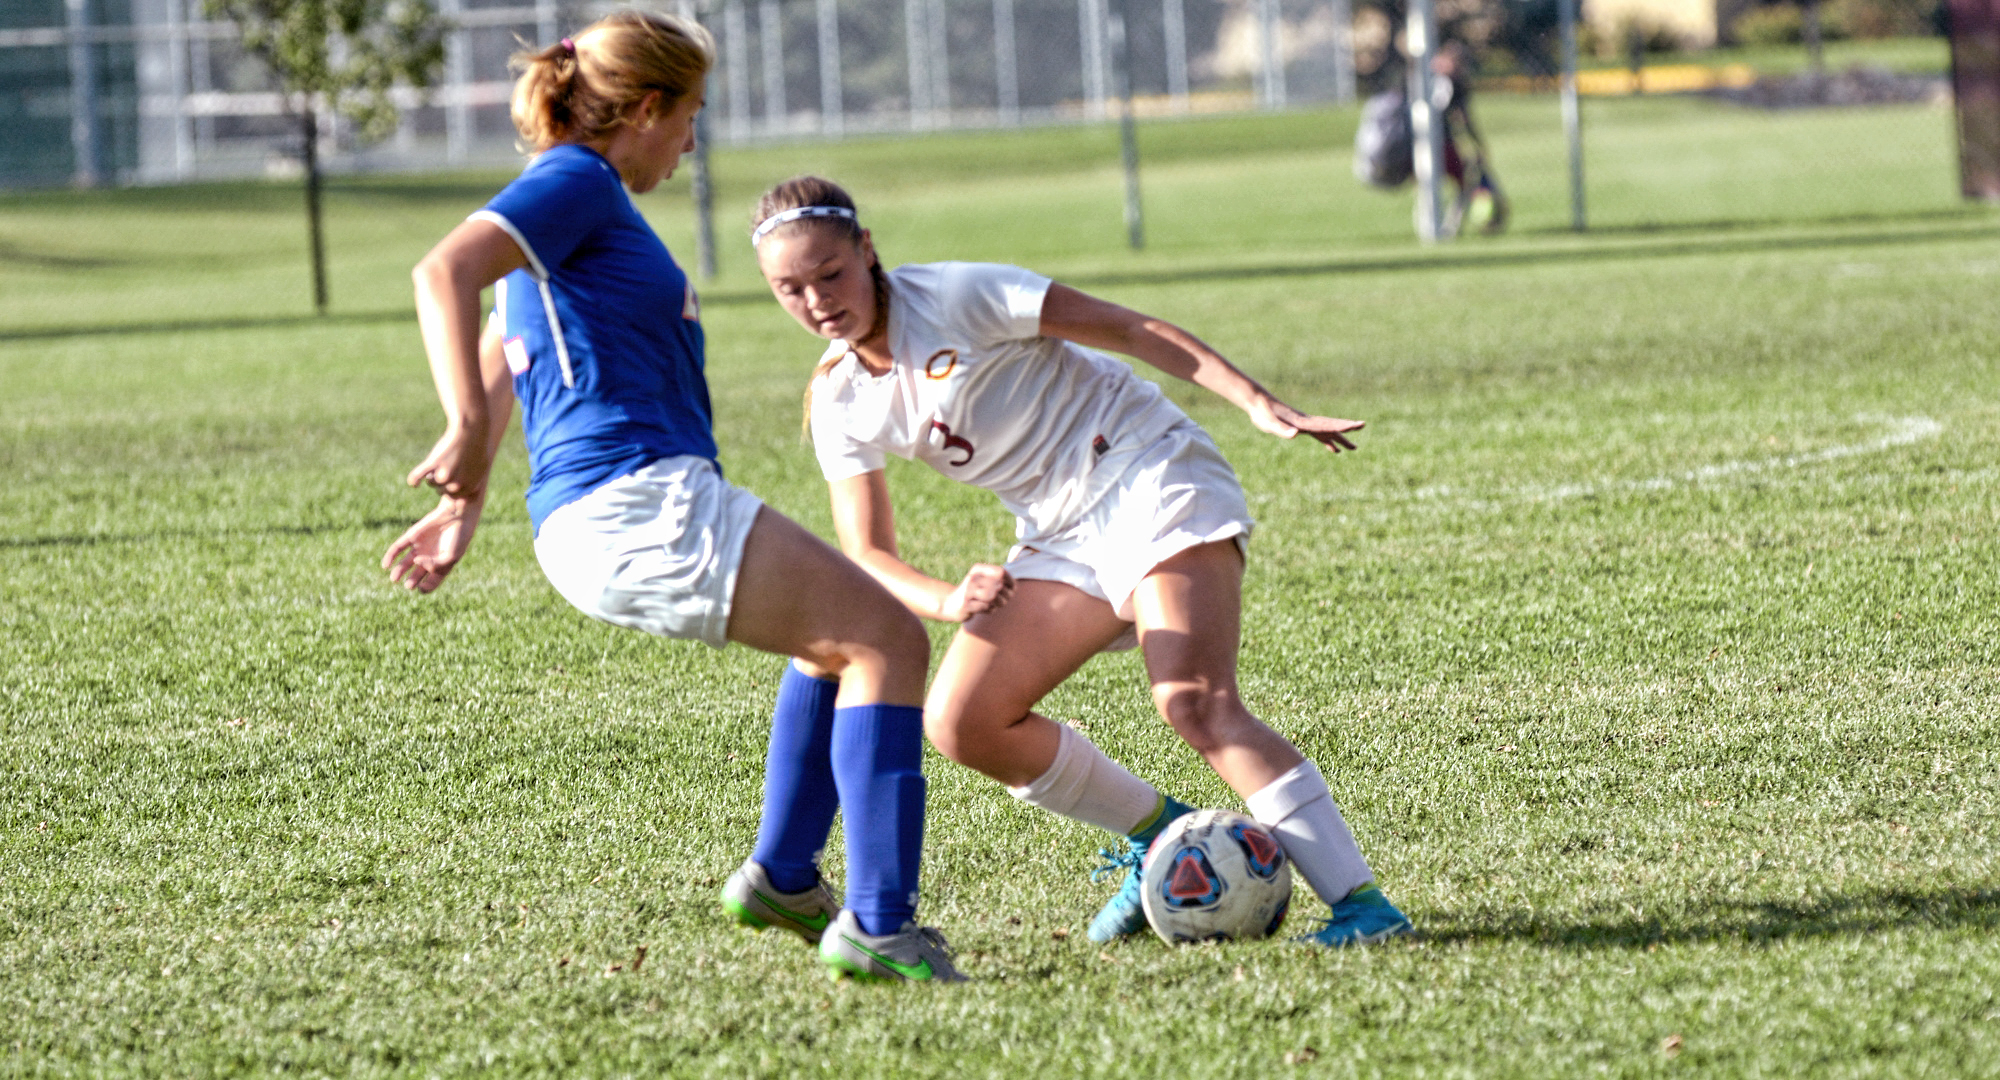 Cobber sophomore Halle Jordan scored her second game-winning goal of the year to help Concordia beat UMAC-leading Northwestern 2-1 in double overtime.